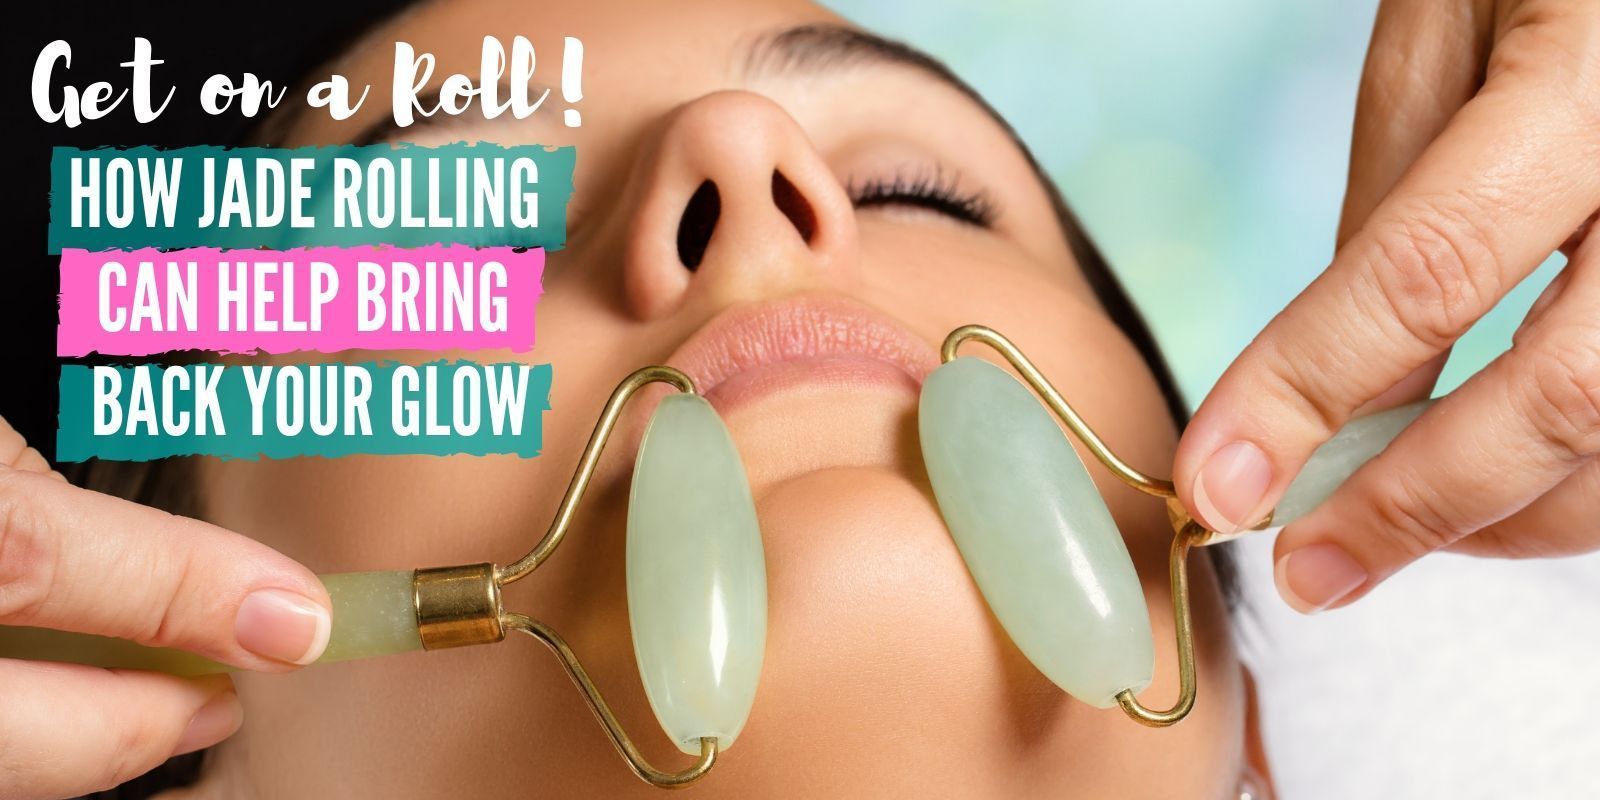 Get on a Roll! How Jade Rolling Can Help Bring Back your Glow - Lure Essentials